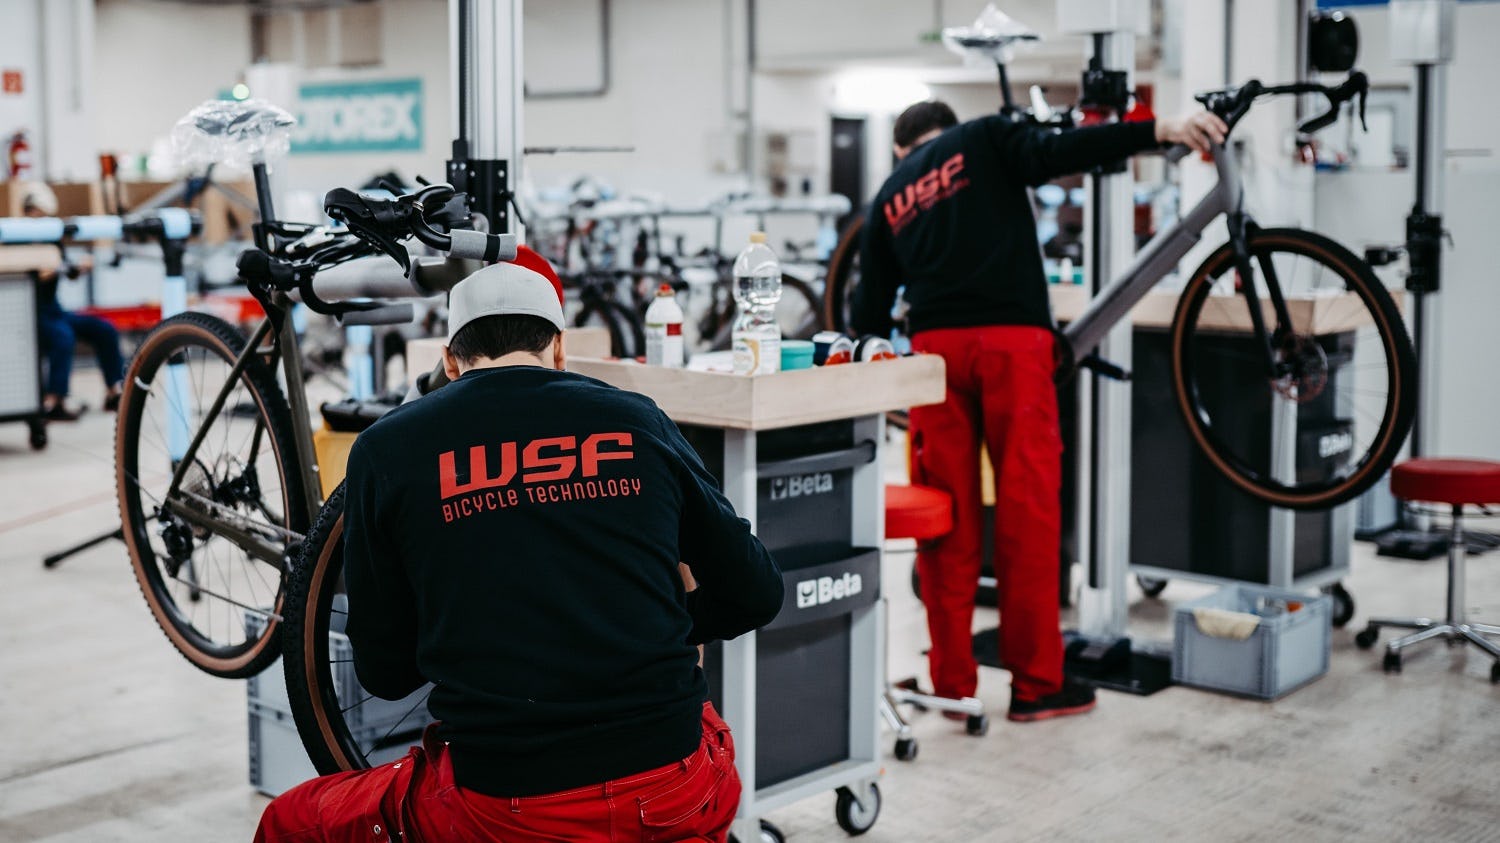 Slipped into insolvency: Austria’s bicycle and e-bike contract manufacturer WSF Bicycle Technology GmbH. – Photo WSF Technology